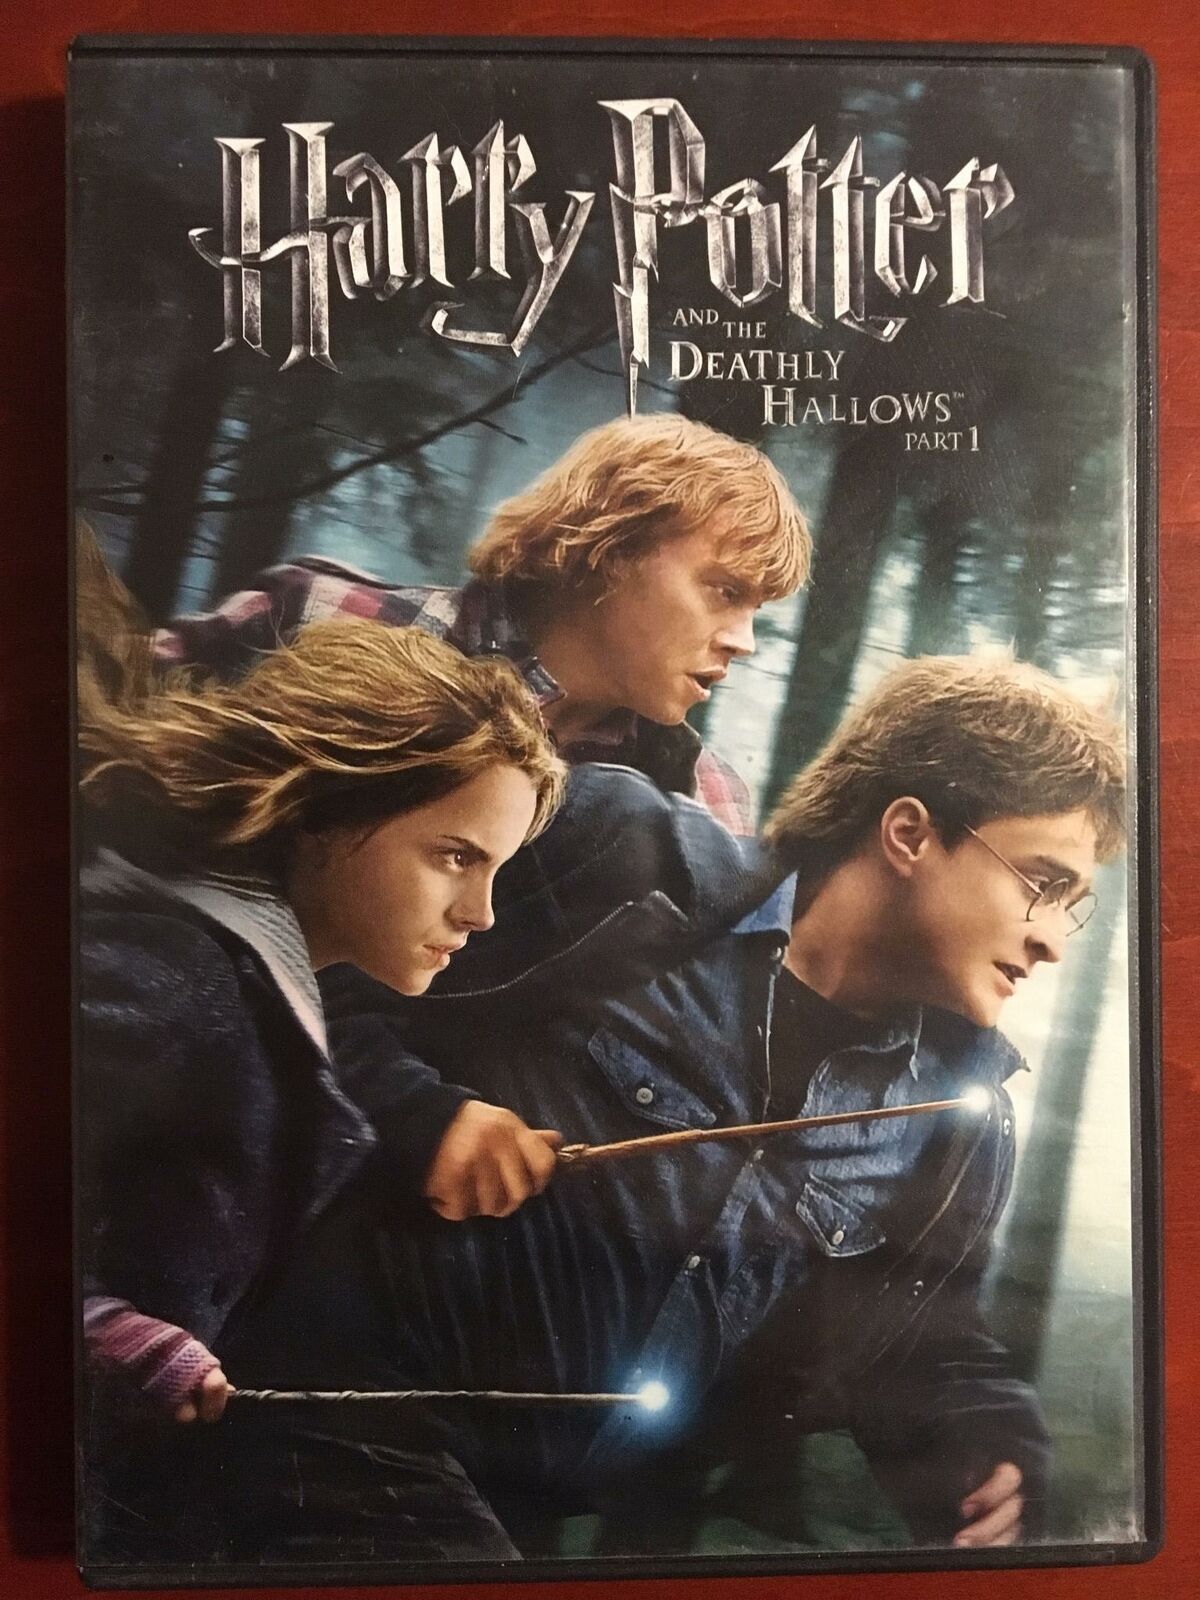 Harry Potter and the Deathly Hallows Part 1 (DVD, 2010) - G0823